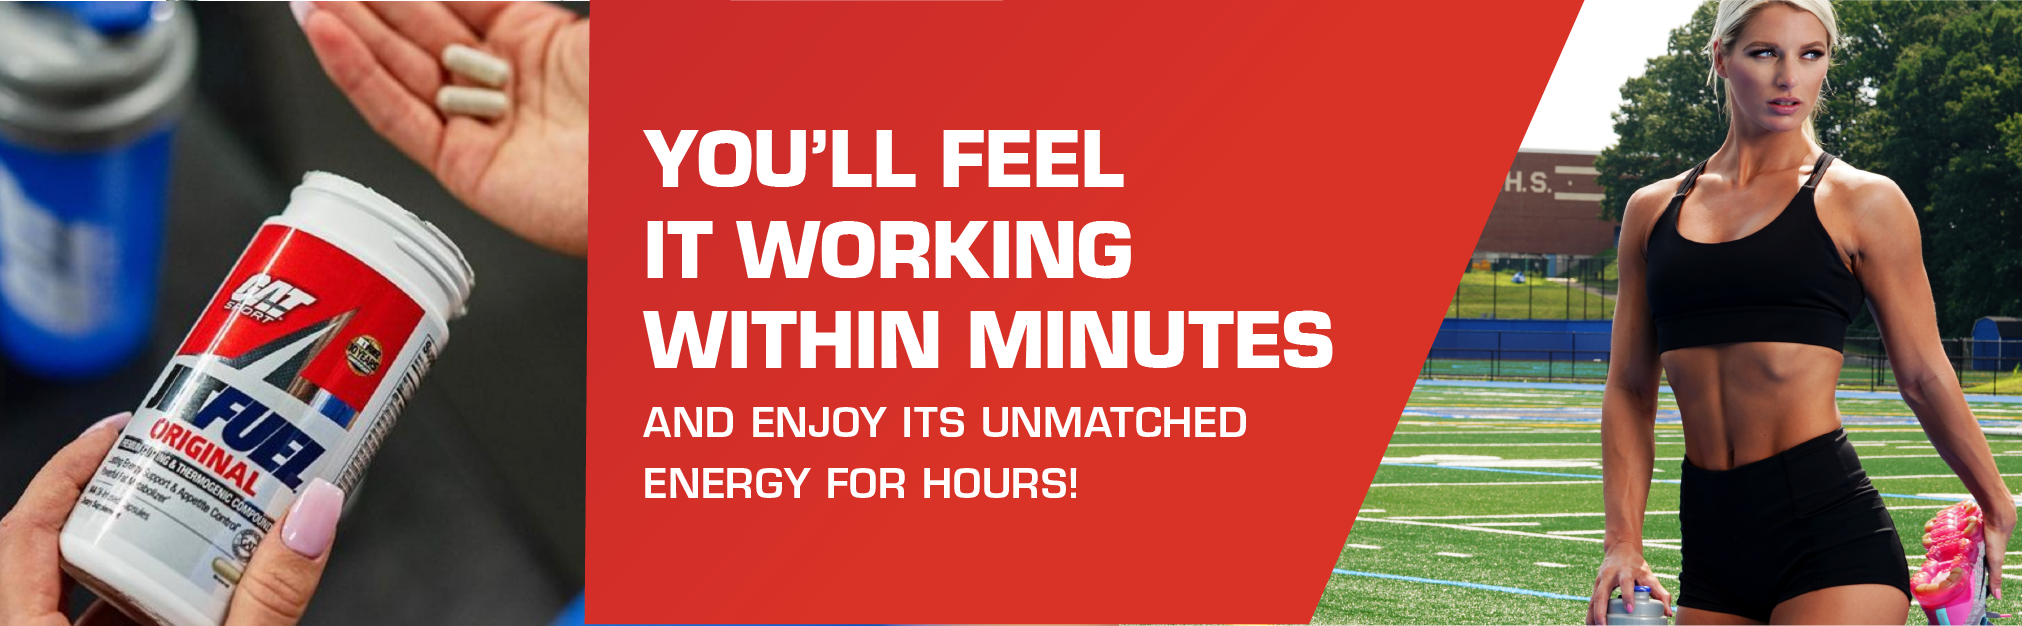 You'll feel it working within minutes